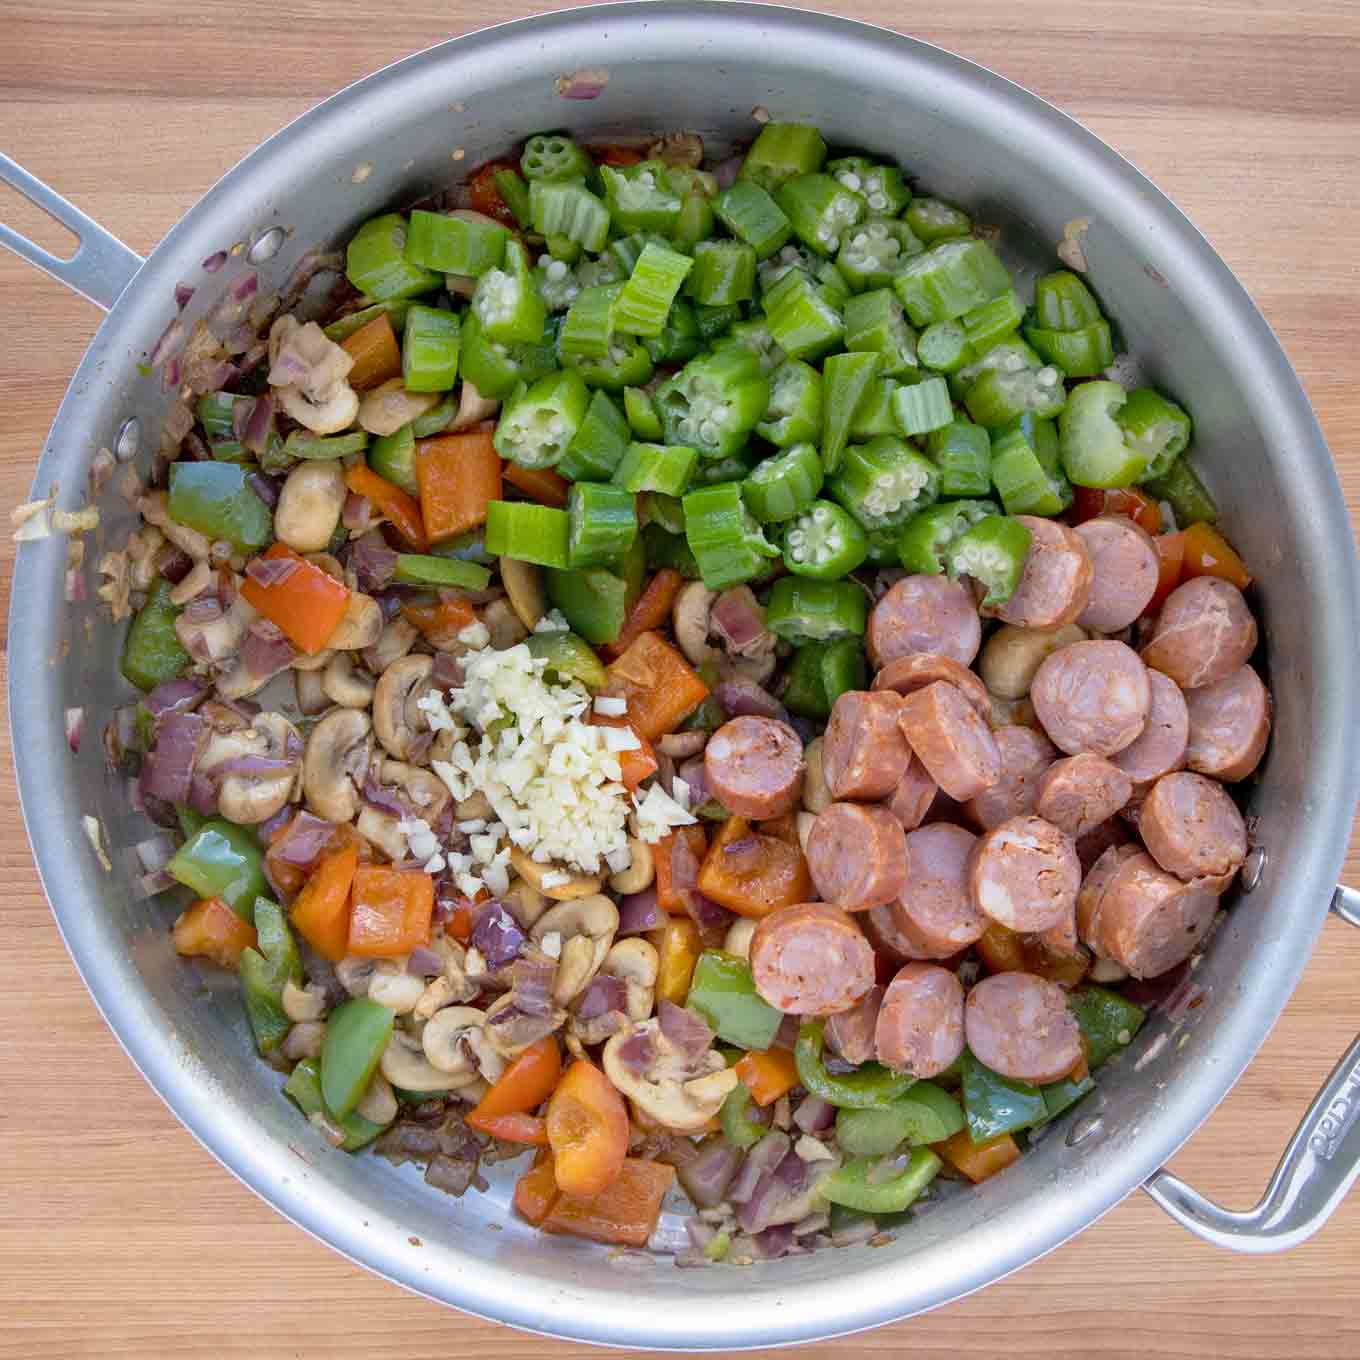 sausage, okra and garlic added to the sauteed vegetables in the skillet